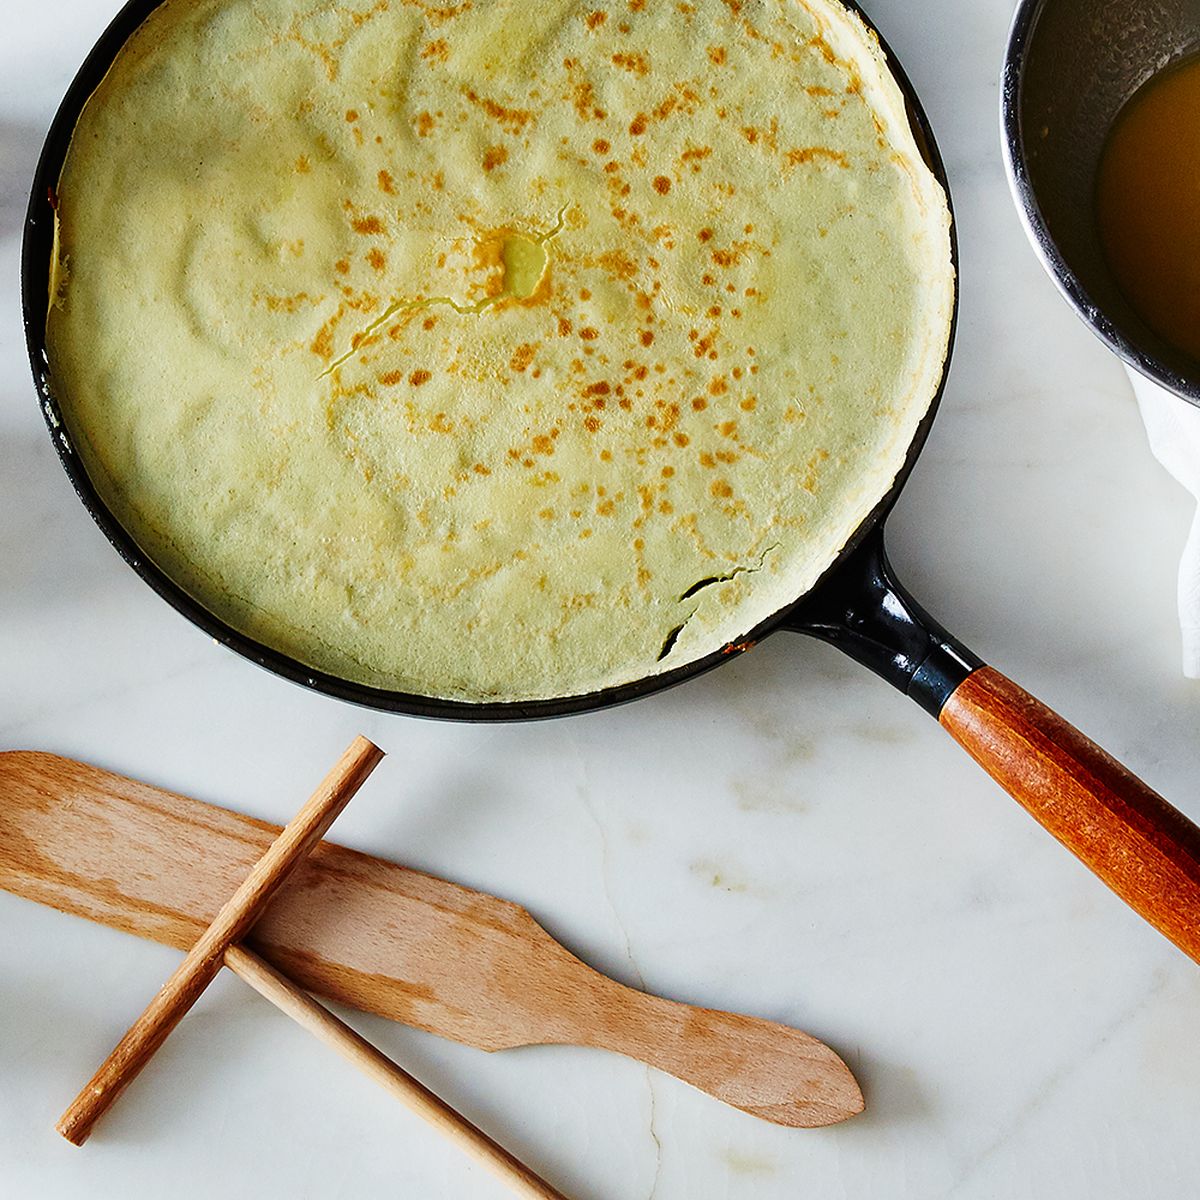 The Crêpe-Making Hack We're Flipping For